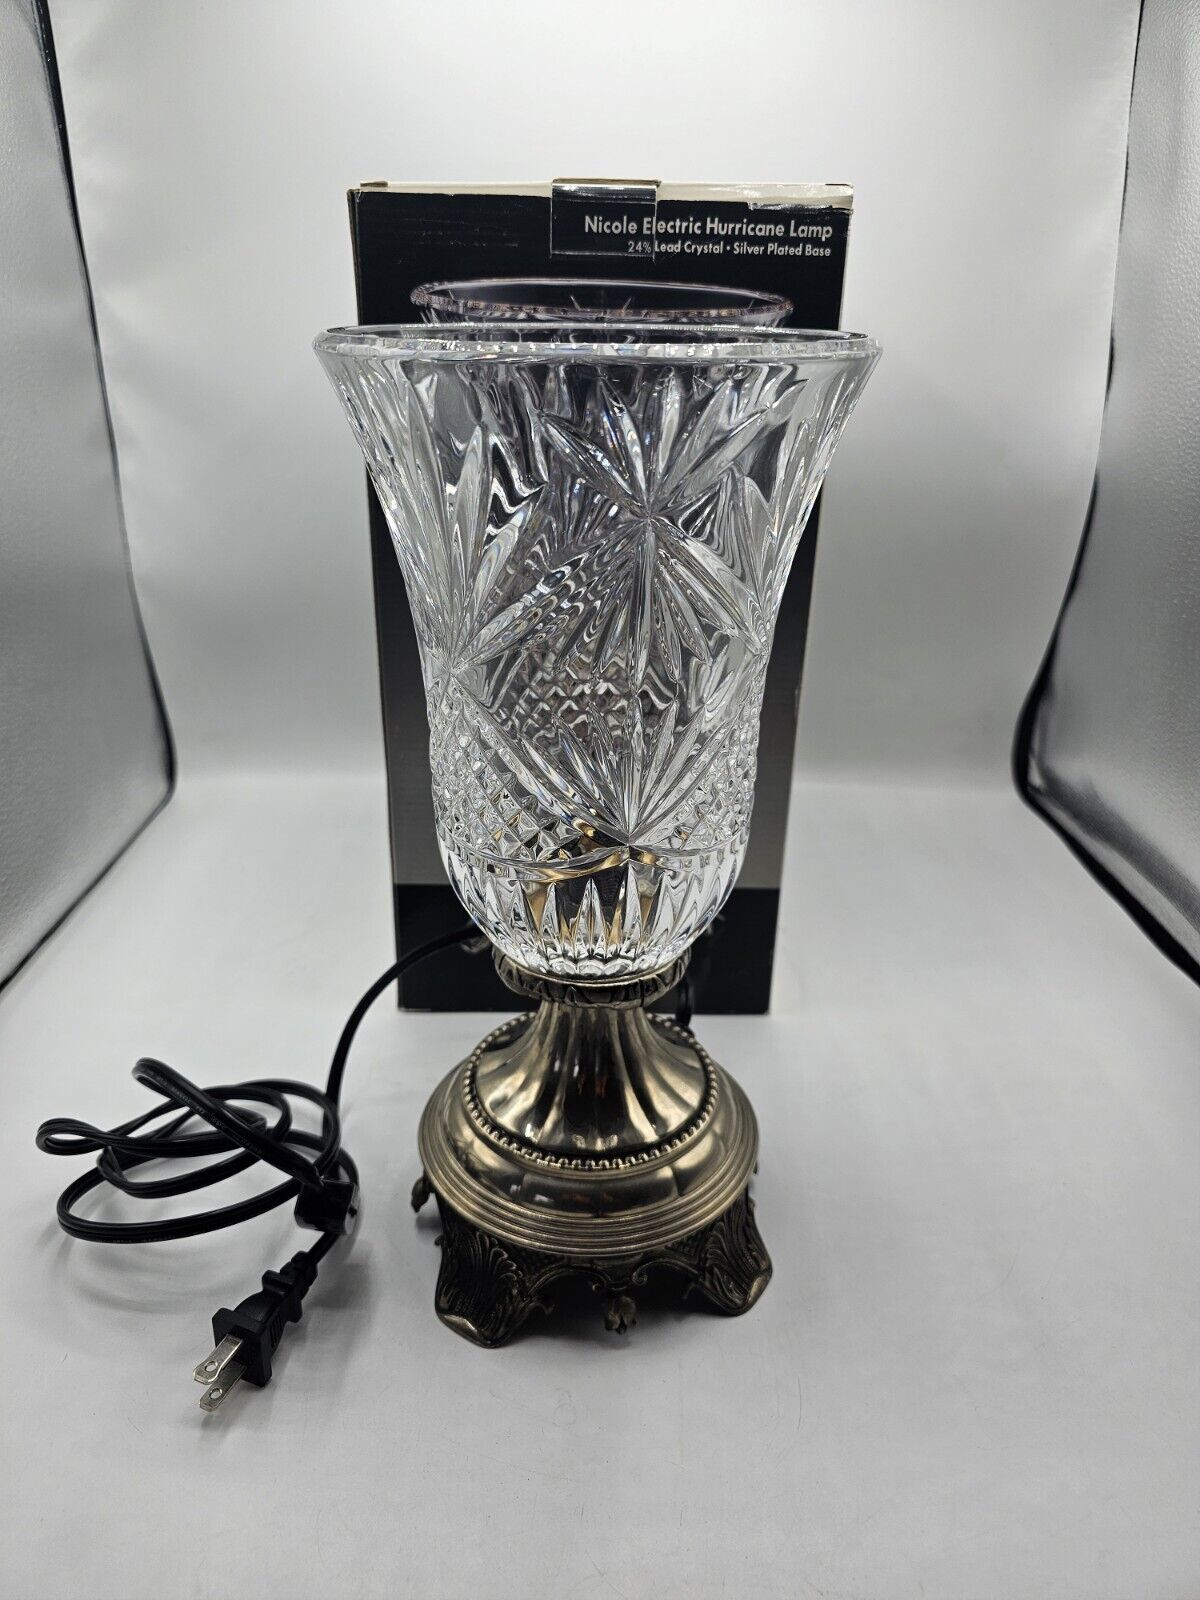 Shannon Vintage Crystal Silver Base Nicole Electric Hurricane Lamp #42781 Tested